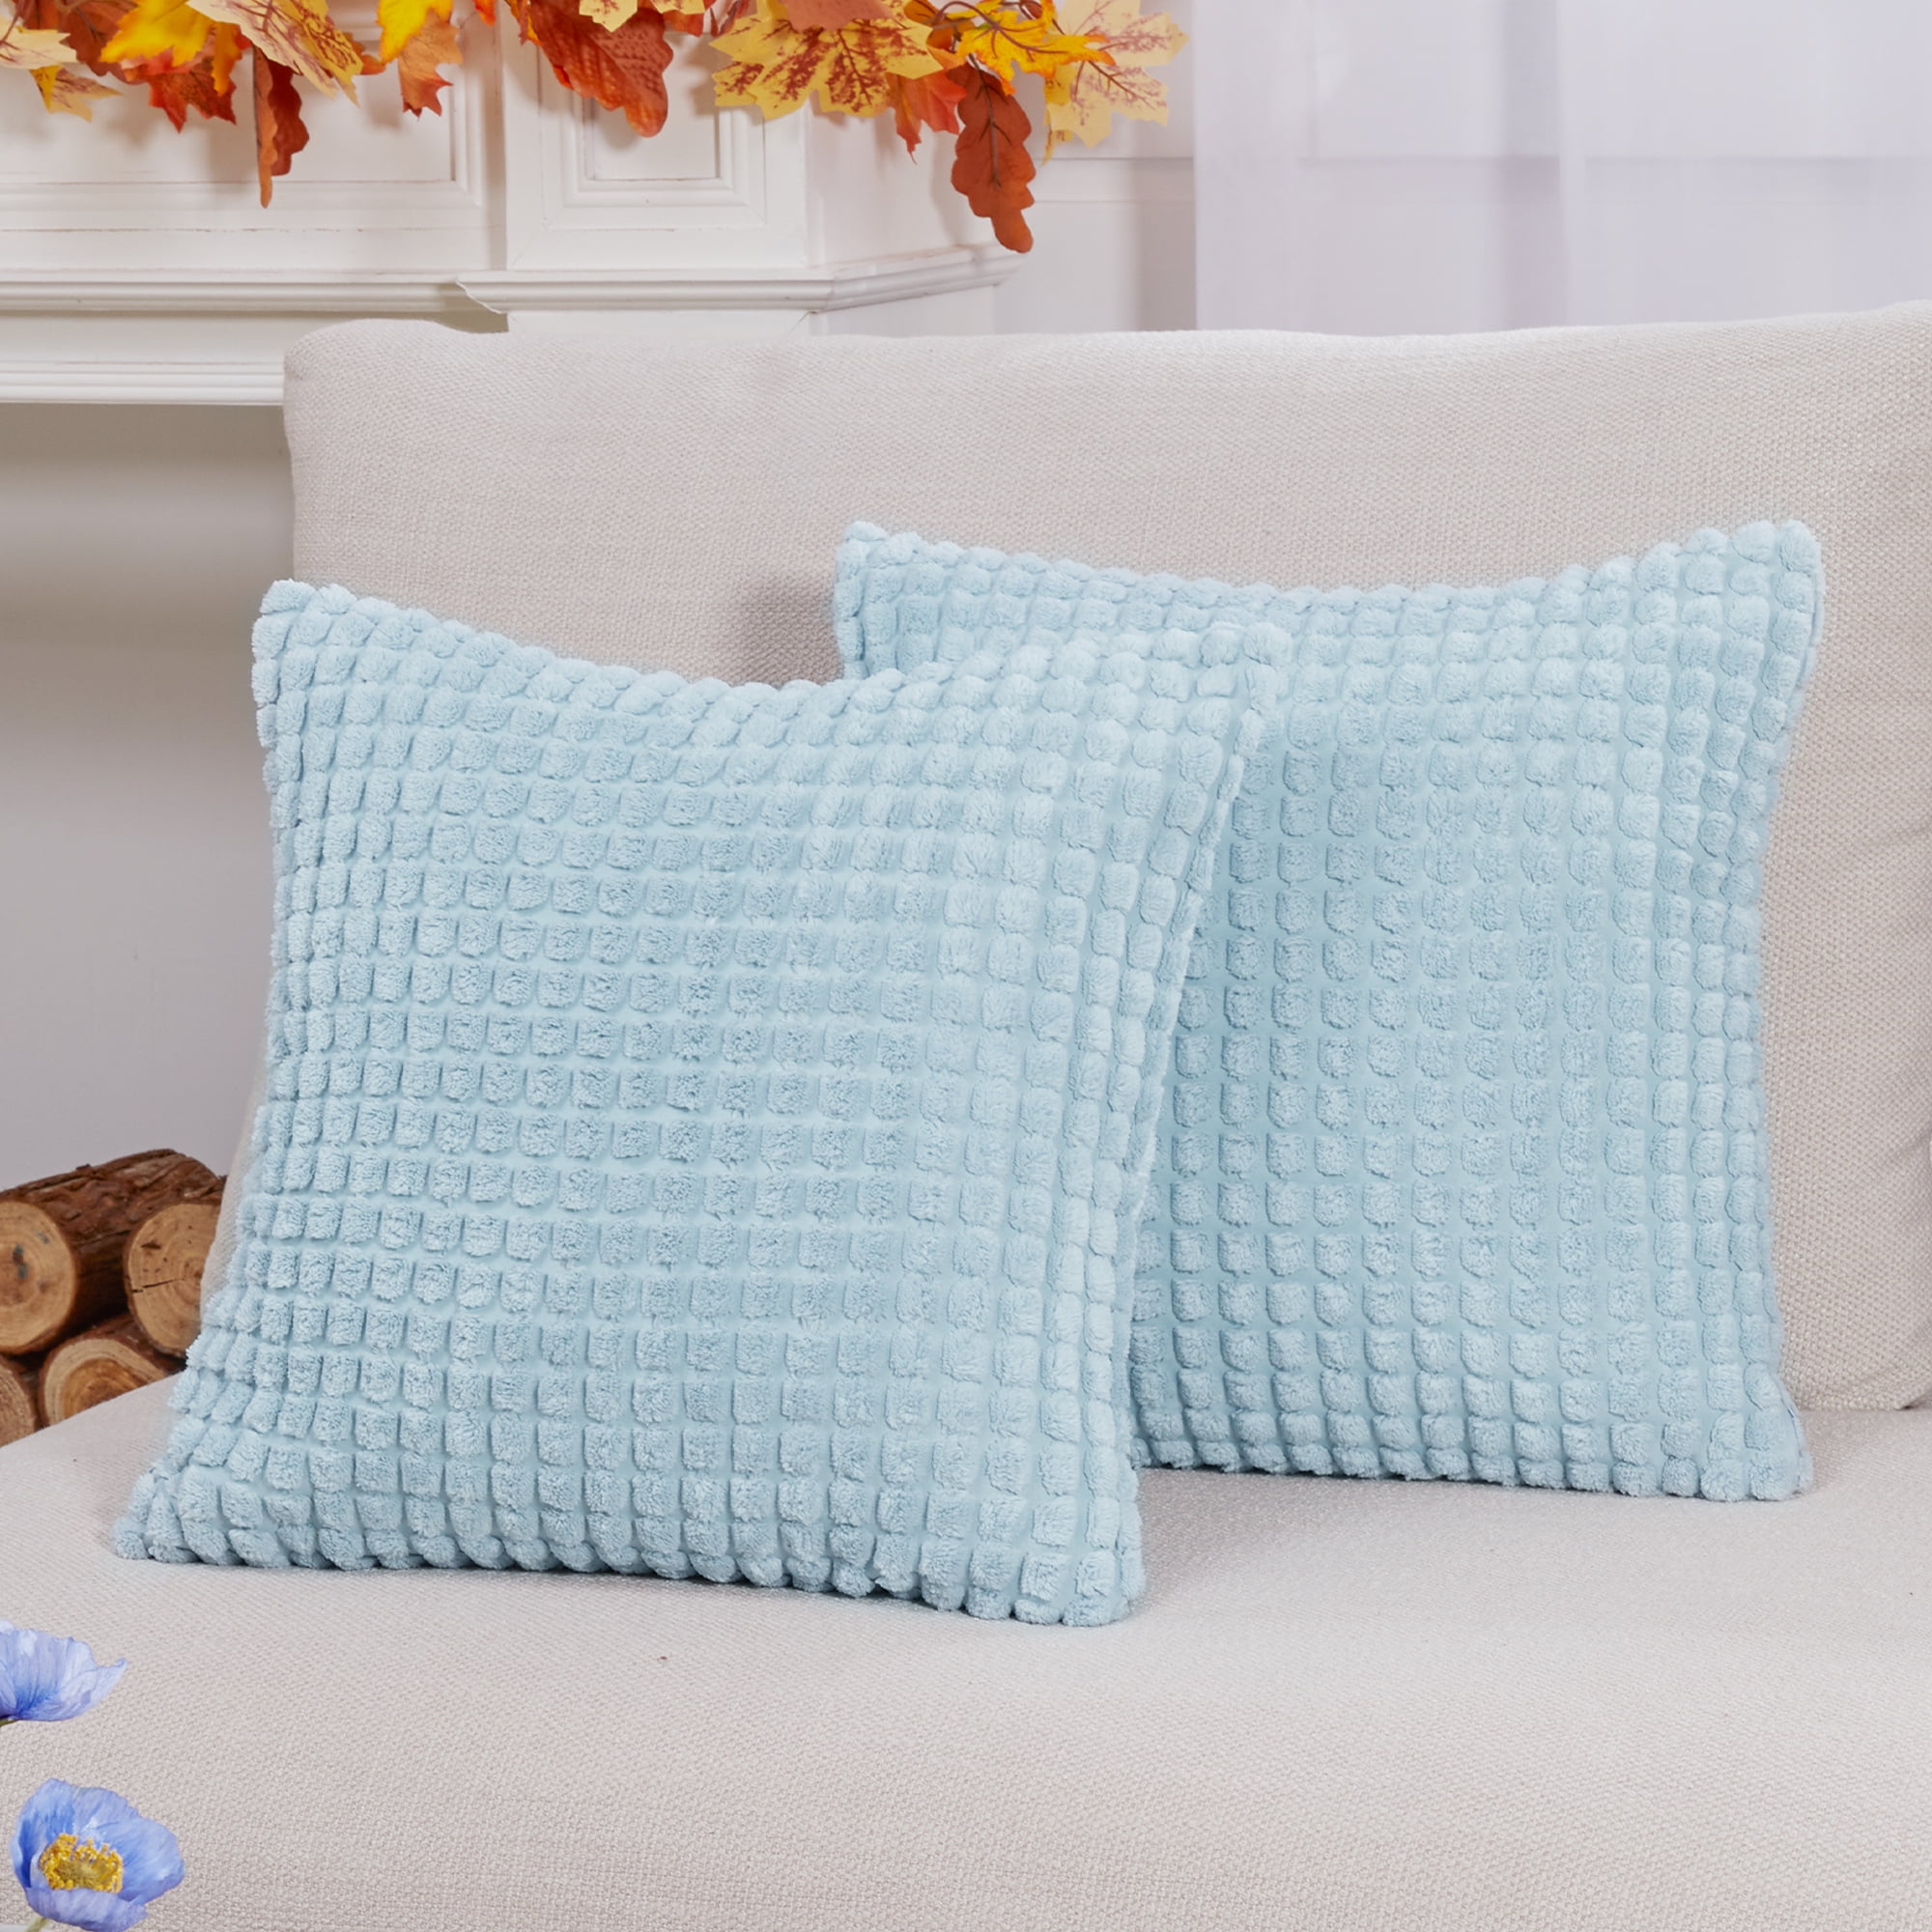 GuoChe Knee Pillow Case PowderBlue Throw Pillow Cases Decorative Satin  Pillowcase with Zipper Closure 20x20 Inch for Home Sofa Bedroom